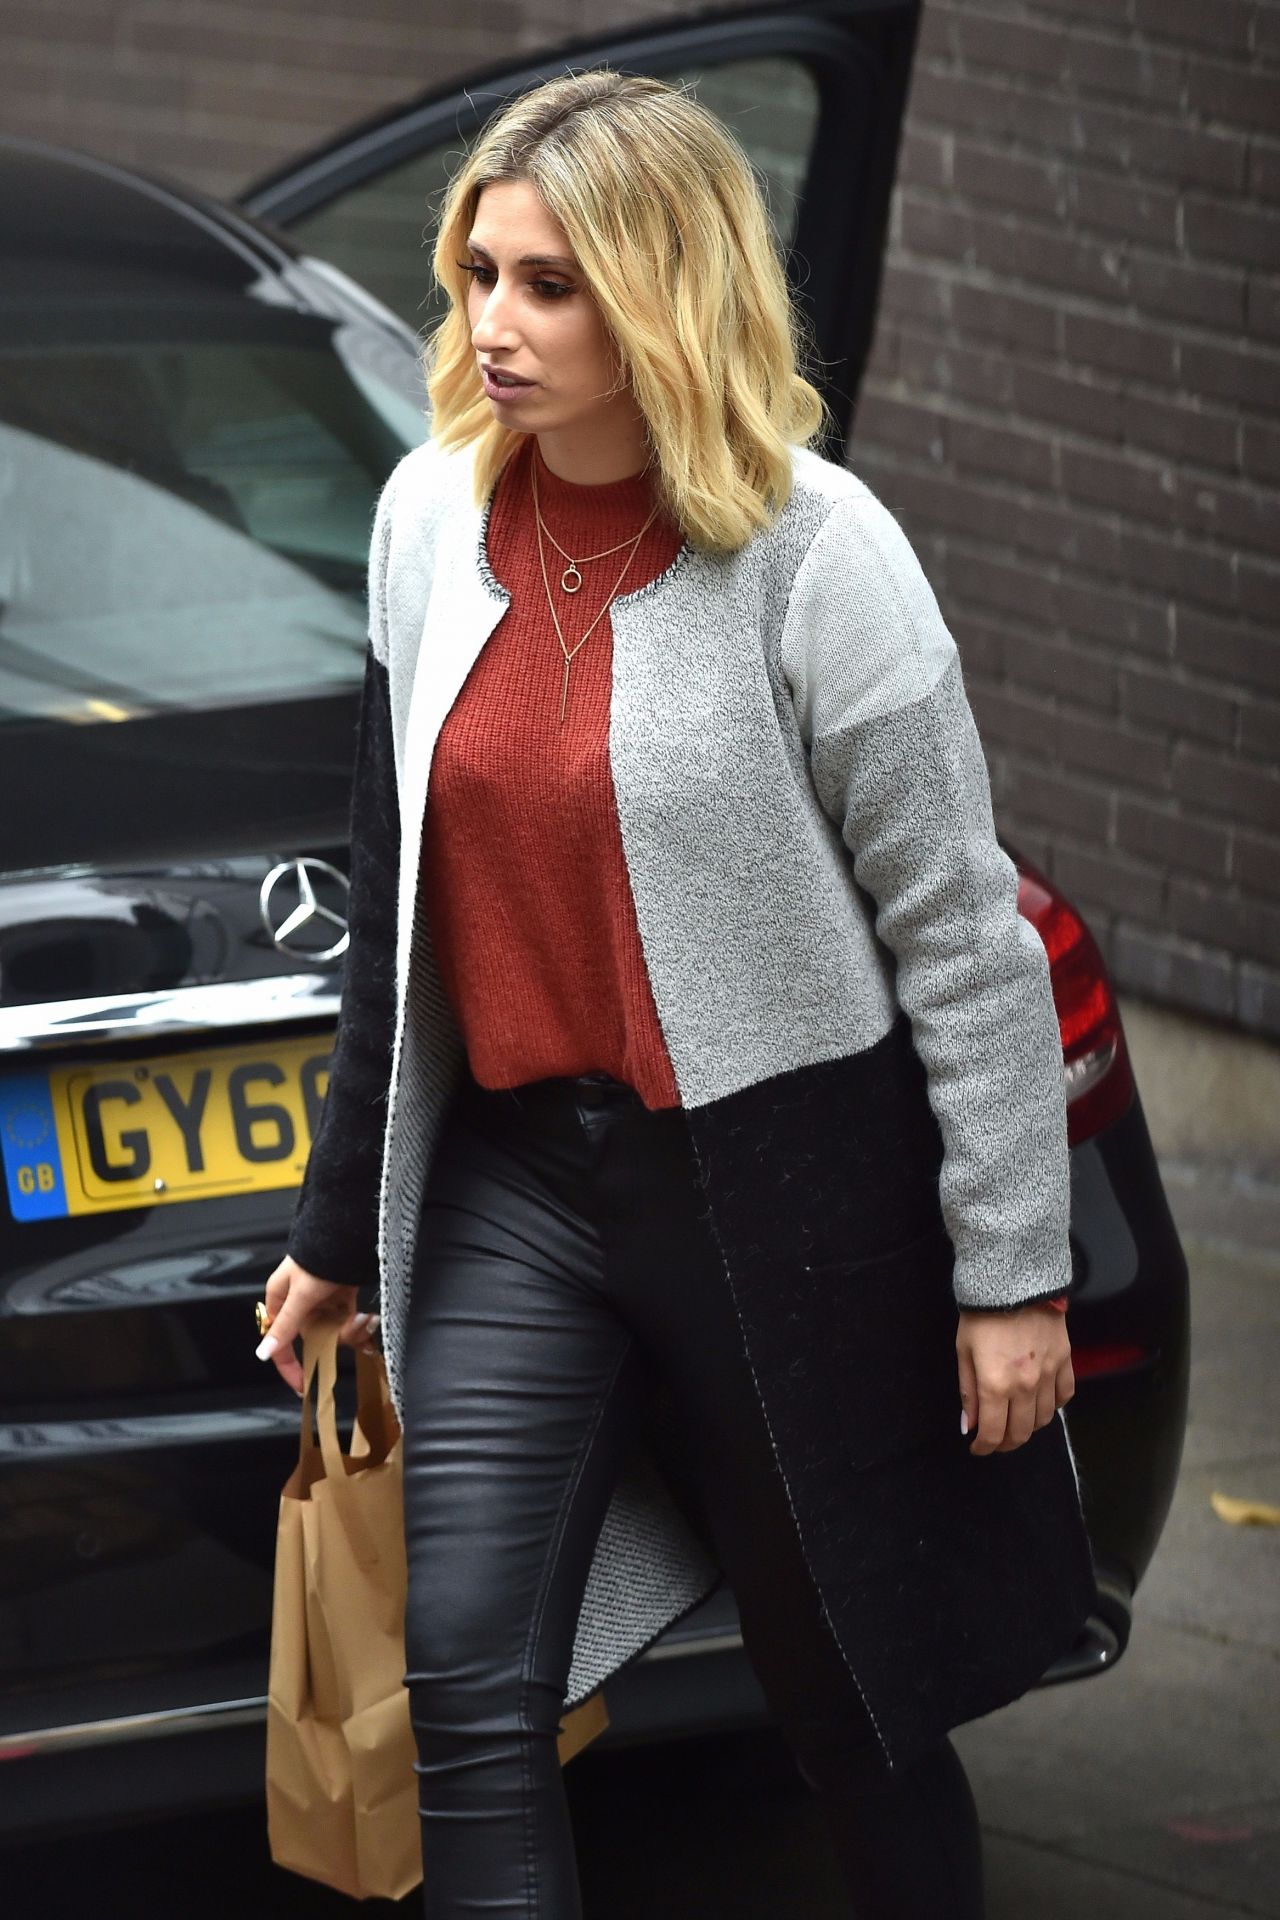 Stacey Solomon at the ITV Studios in London 10/13/2017.